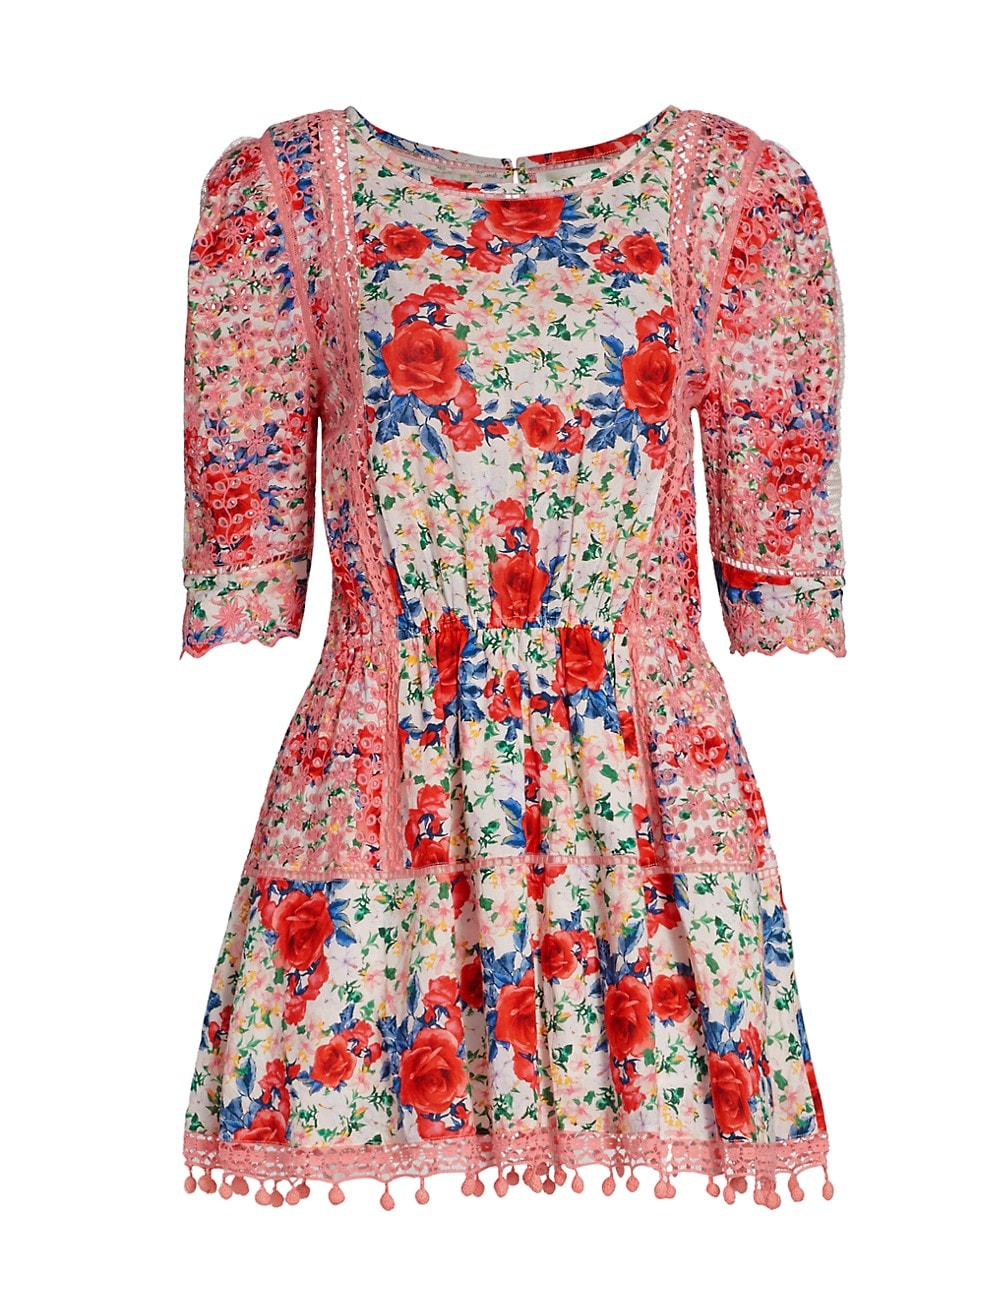 Must have pretty floral summer dresses chosen by Marla Meridith